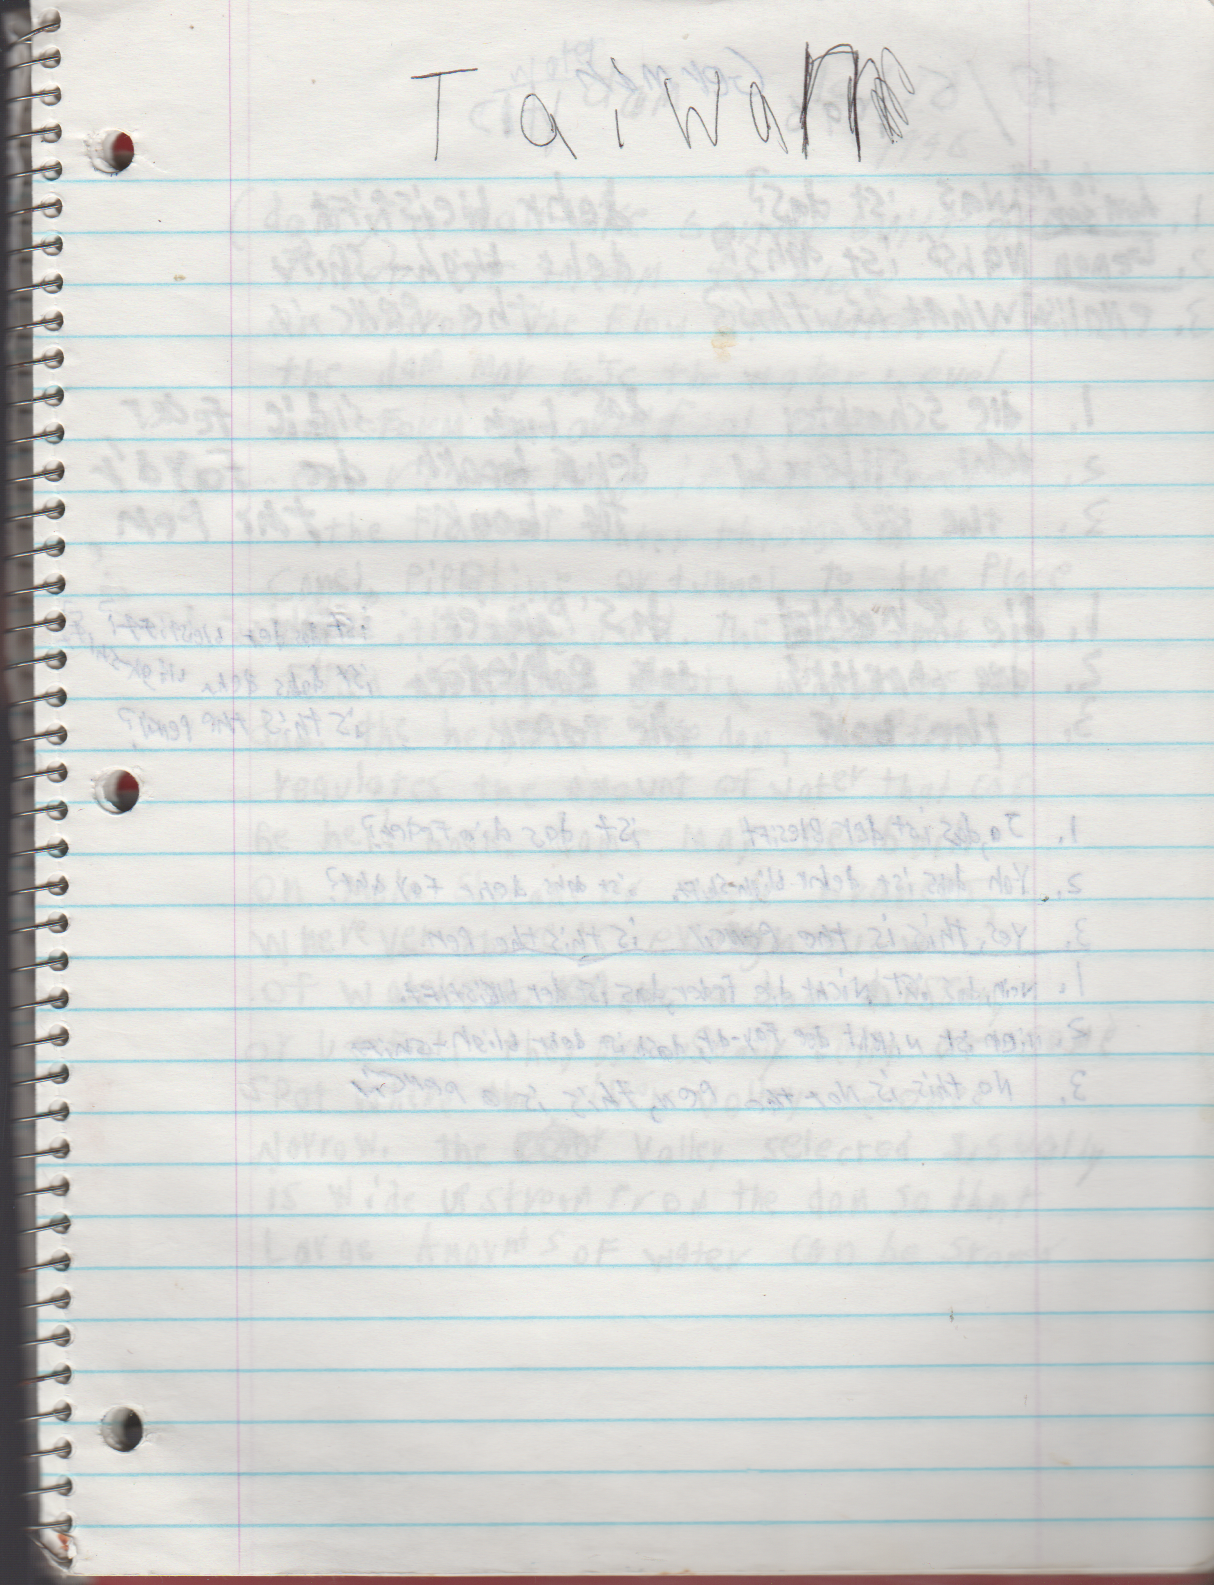 1996-08-18 - Saturday - 11 yr old Joey Arnold's School Book, dates through to 1998 apx, mostly 96, Writings, Drawings, Etc-011.png